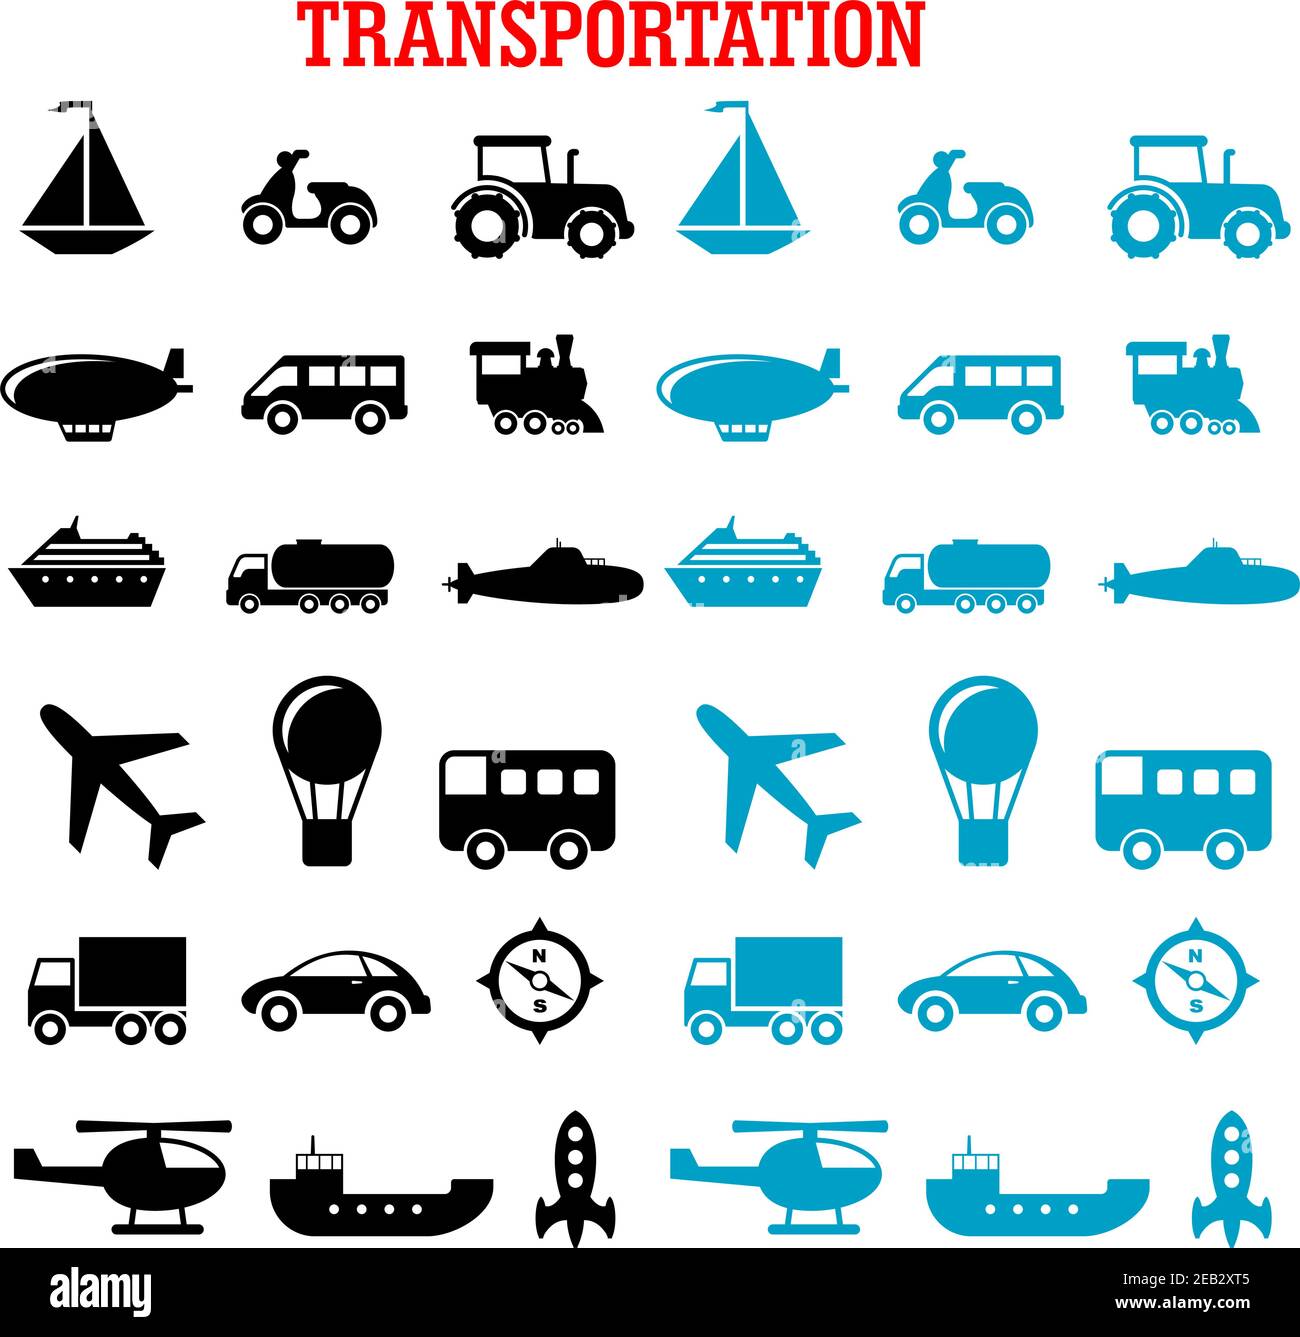 Flat transportation icons set with cars, buses, train, trucks, ship, airplane, motorcycle, sailboat, compass, tractor, helicopter, rocket, submarine, Stock Vector